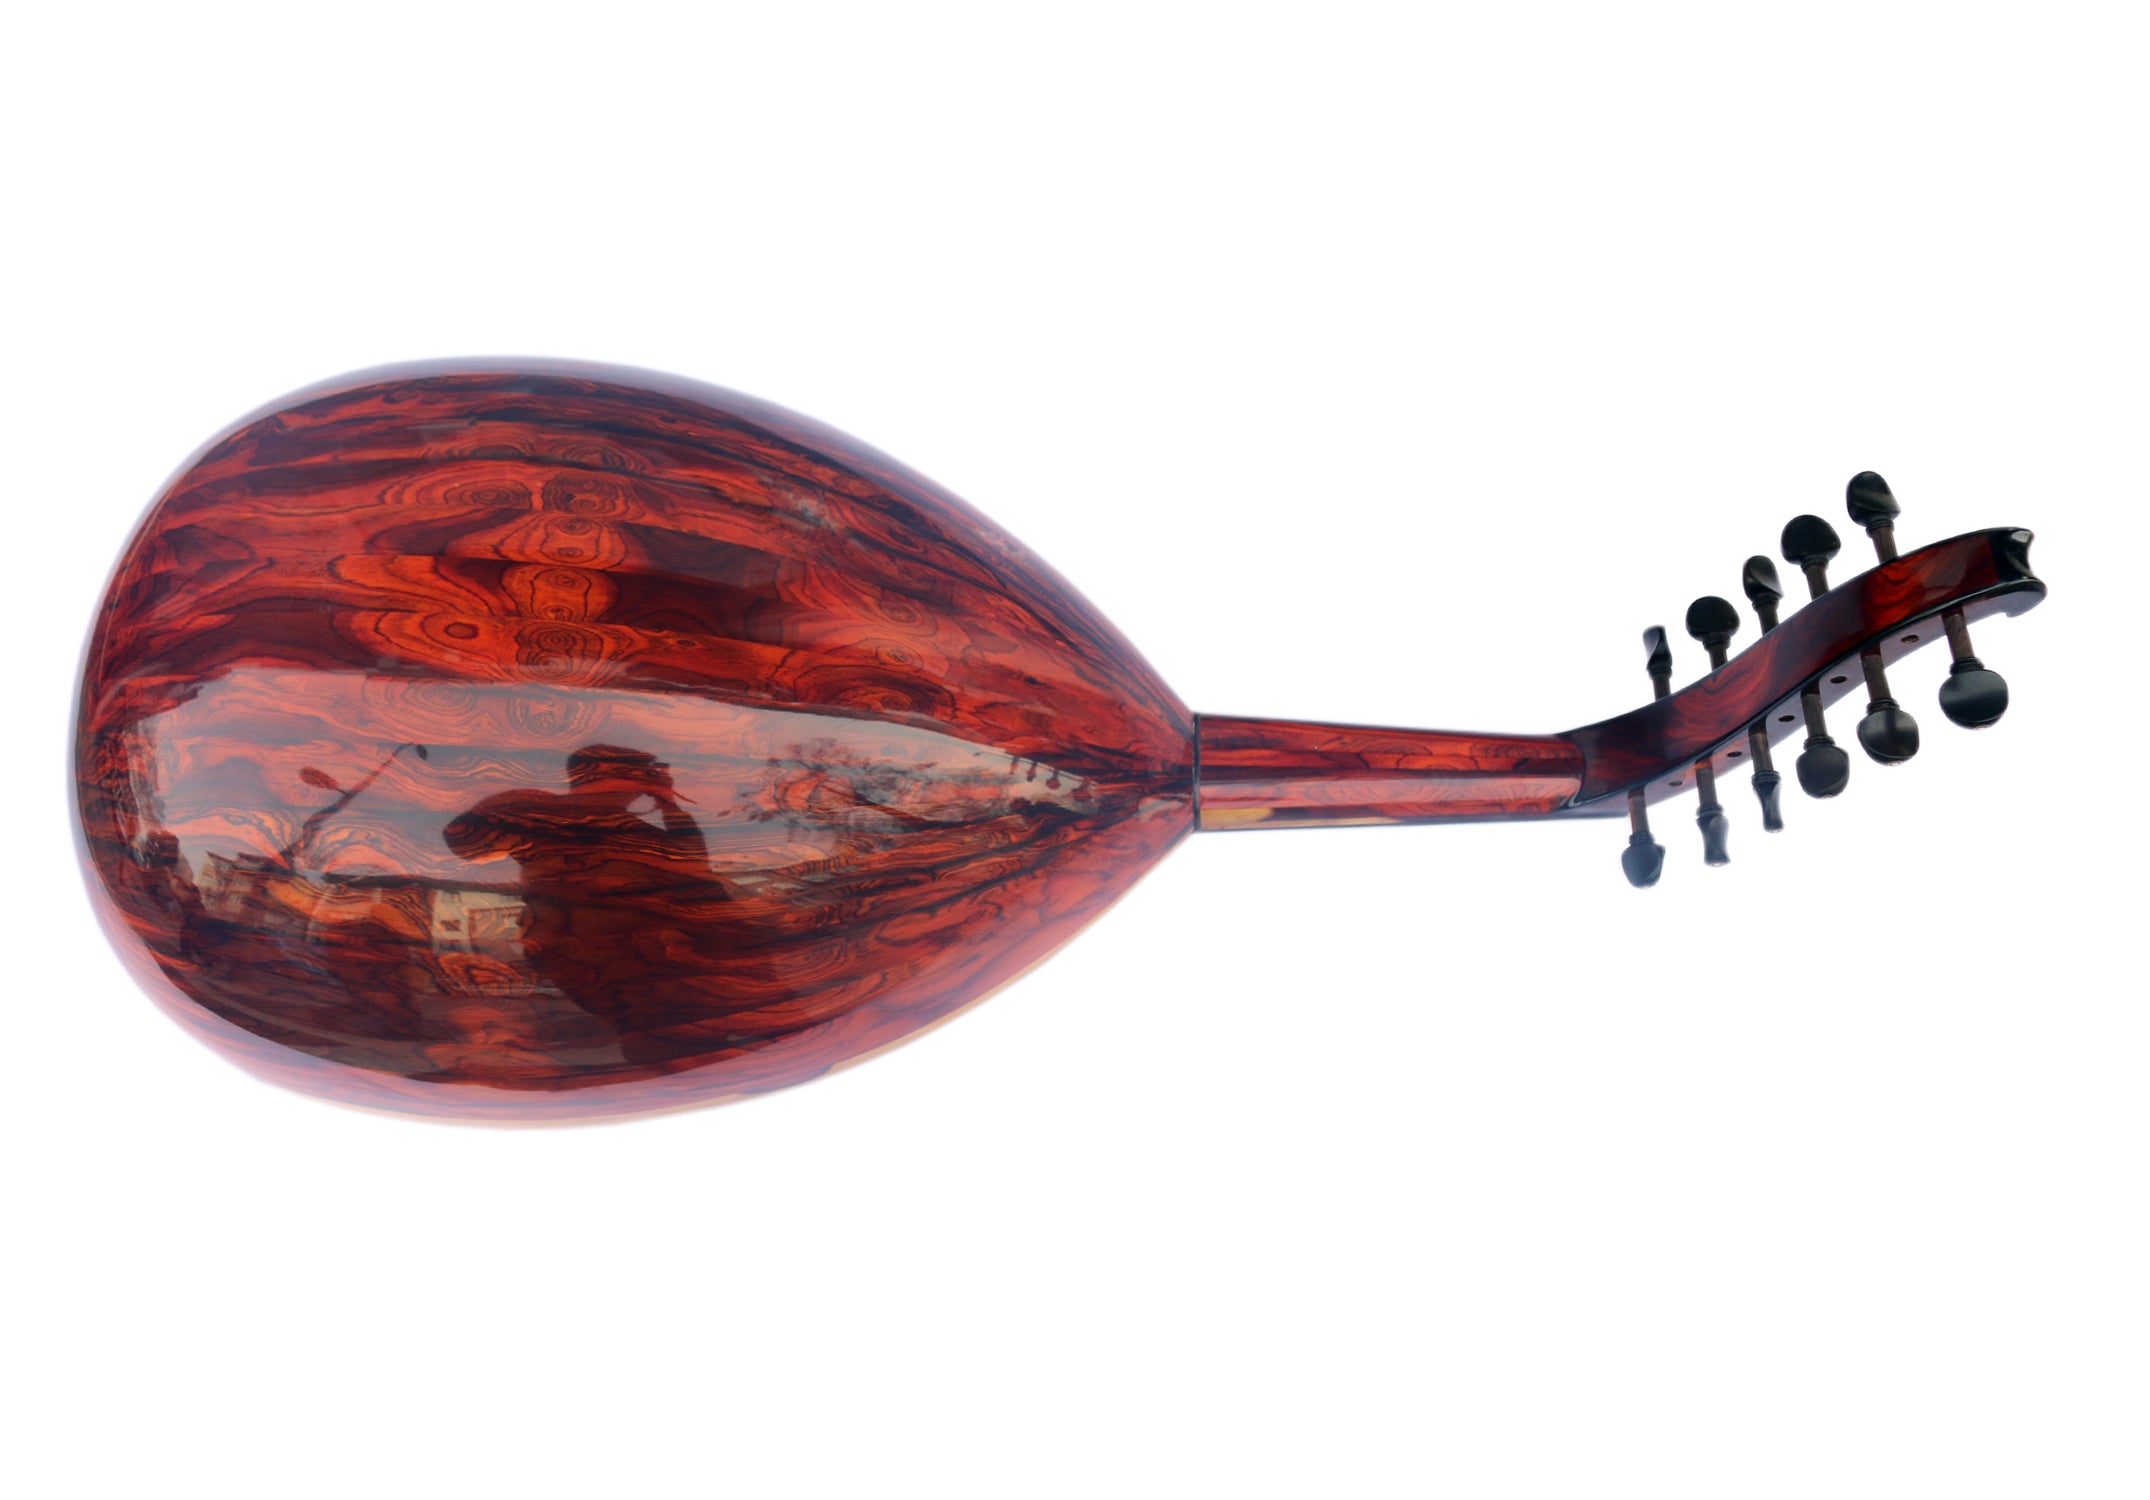 Special Turkish Oud Cocobolo Wood MRS-16 By Miras